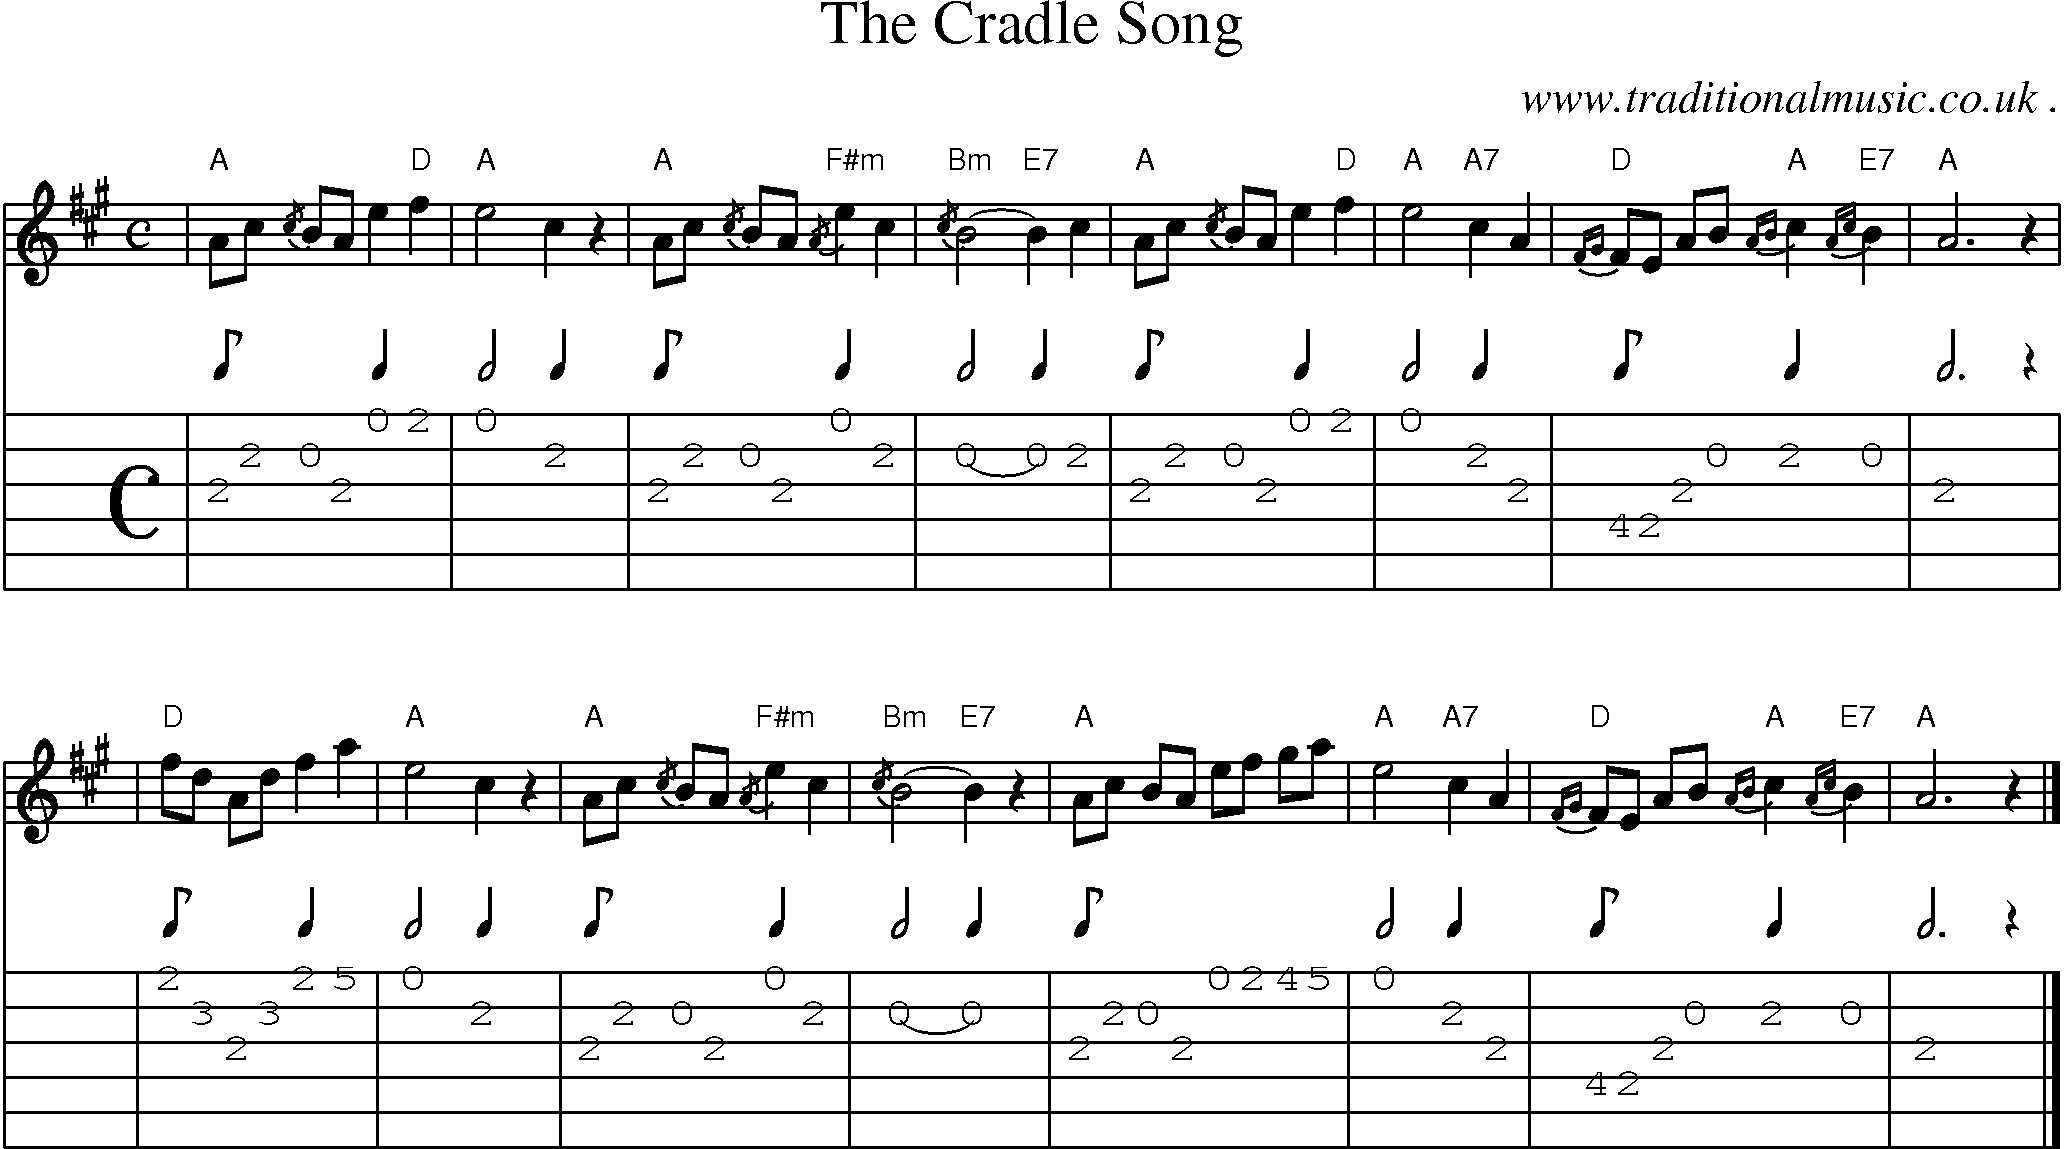 Sheet-music score, Chords and Guitar Tabs for The Cradle Song.